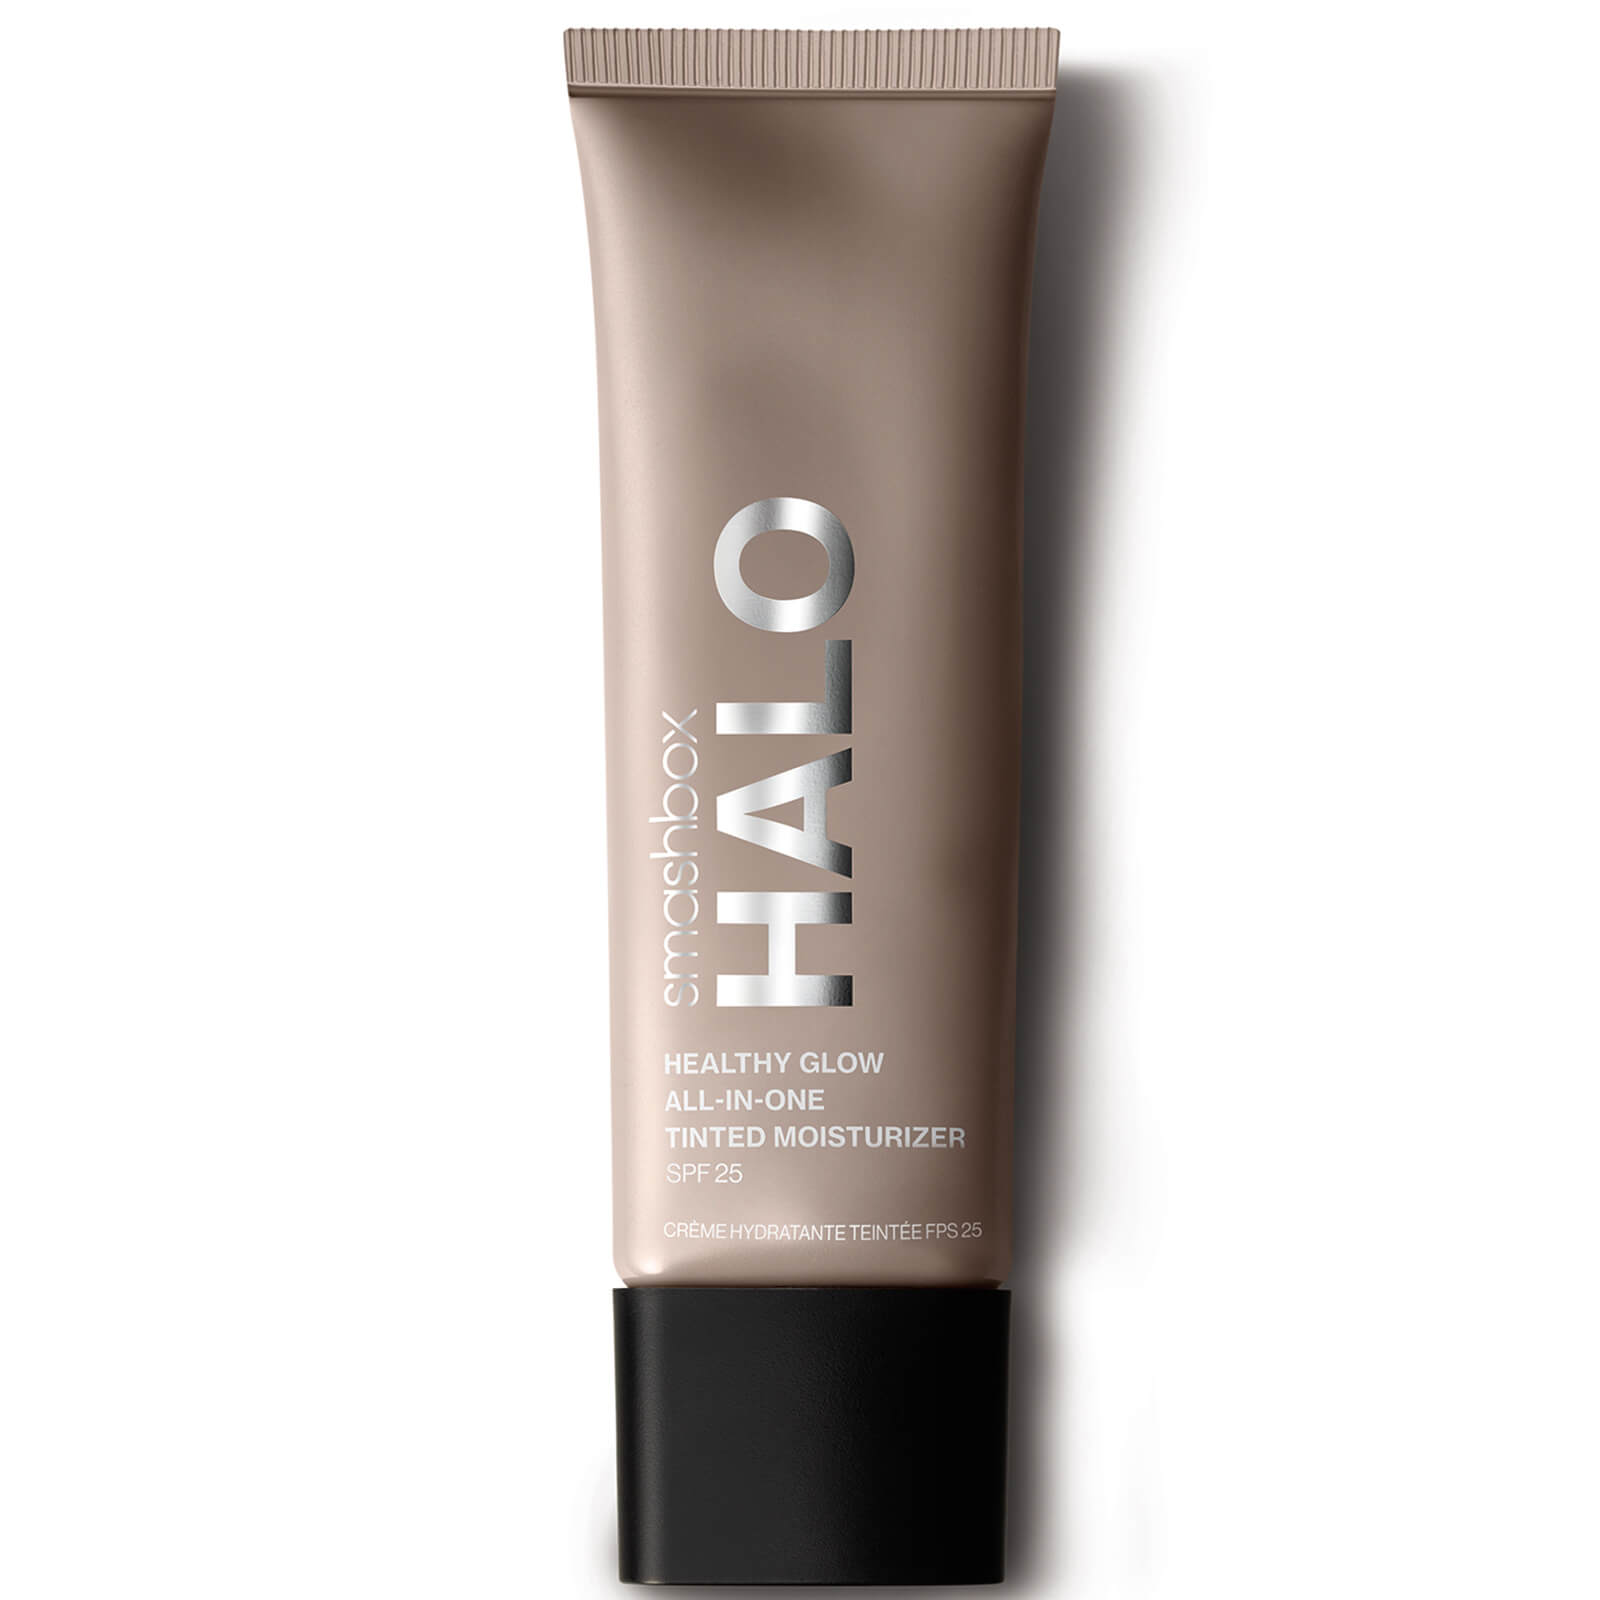 Image of Smashbox Halo Healthy Glow All-in-One SPF25 Tinted Moisturiser 40ml (Various Shades) - Tan Deep